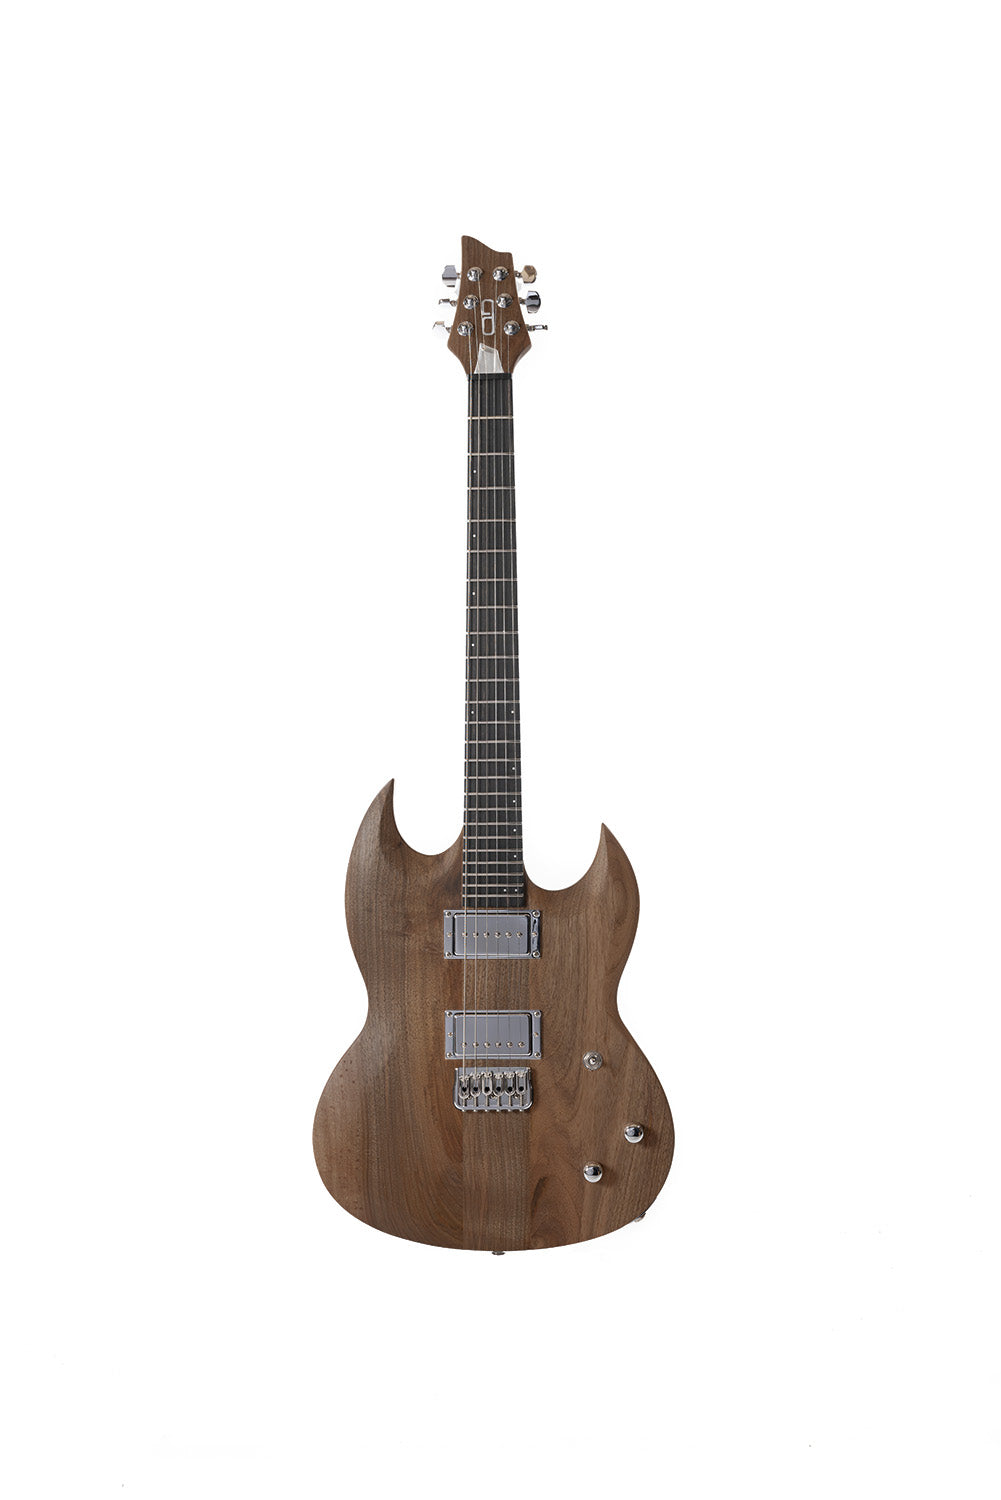 SY_Full_Walnut_Chocolate_Front_De_Leeuw_Guitars_Paris_Made_in_France_Luthier_Guitar_Maker_France_Neck_Through_Manche_Traversant